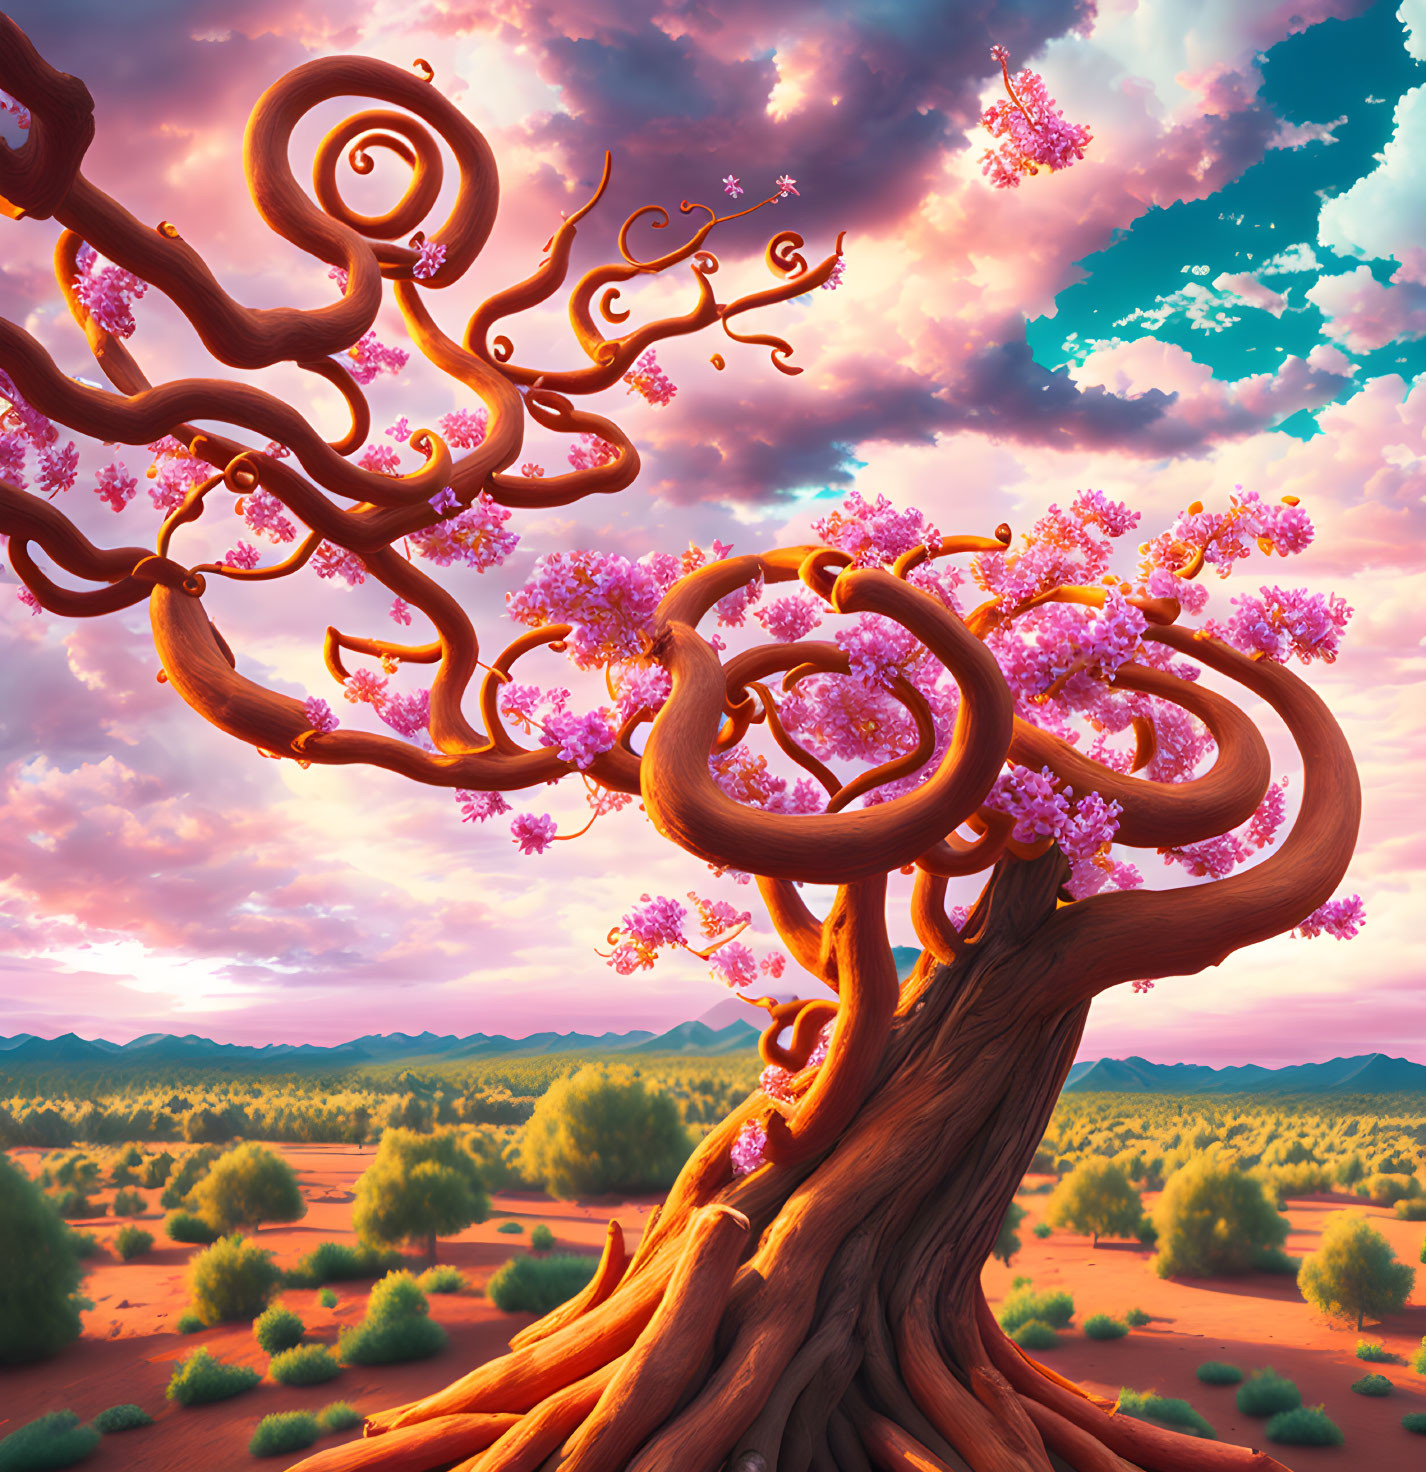 Vibrant twisted tree with pink blossoms in surreal desert landscape